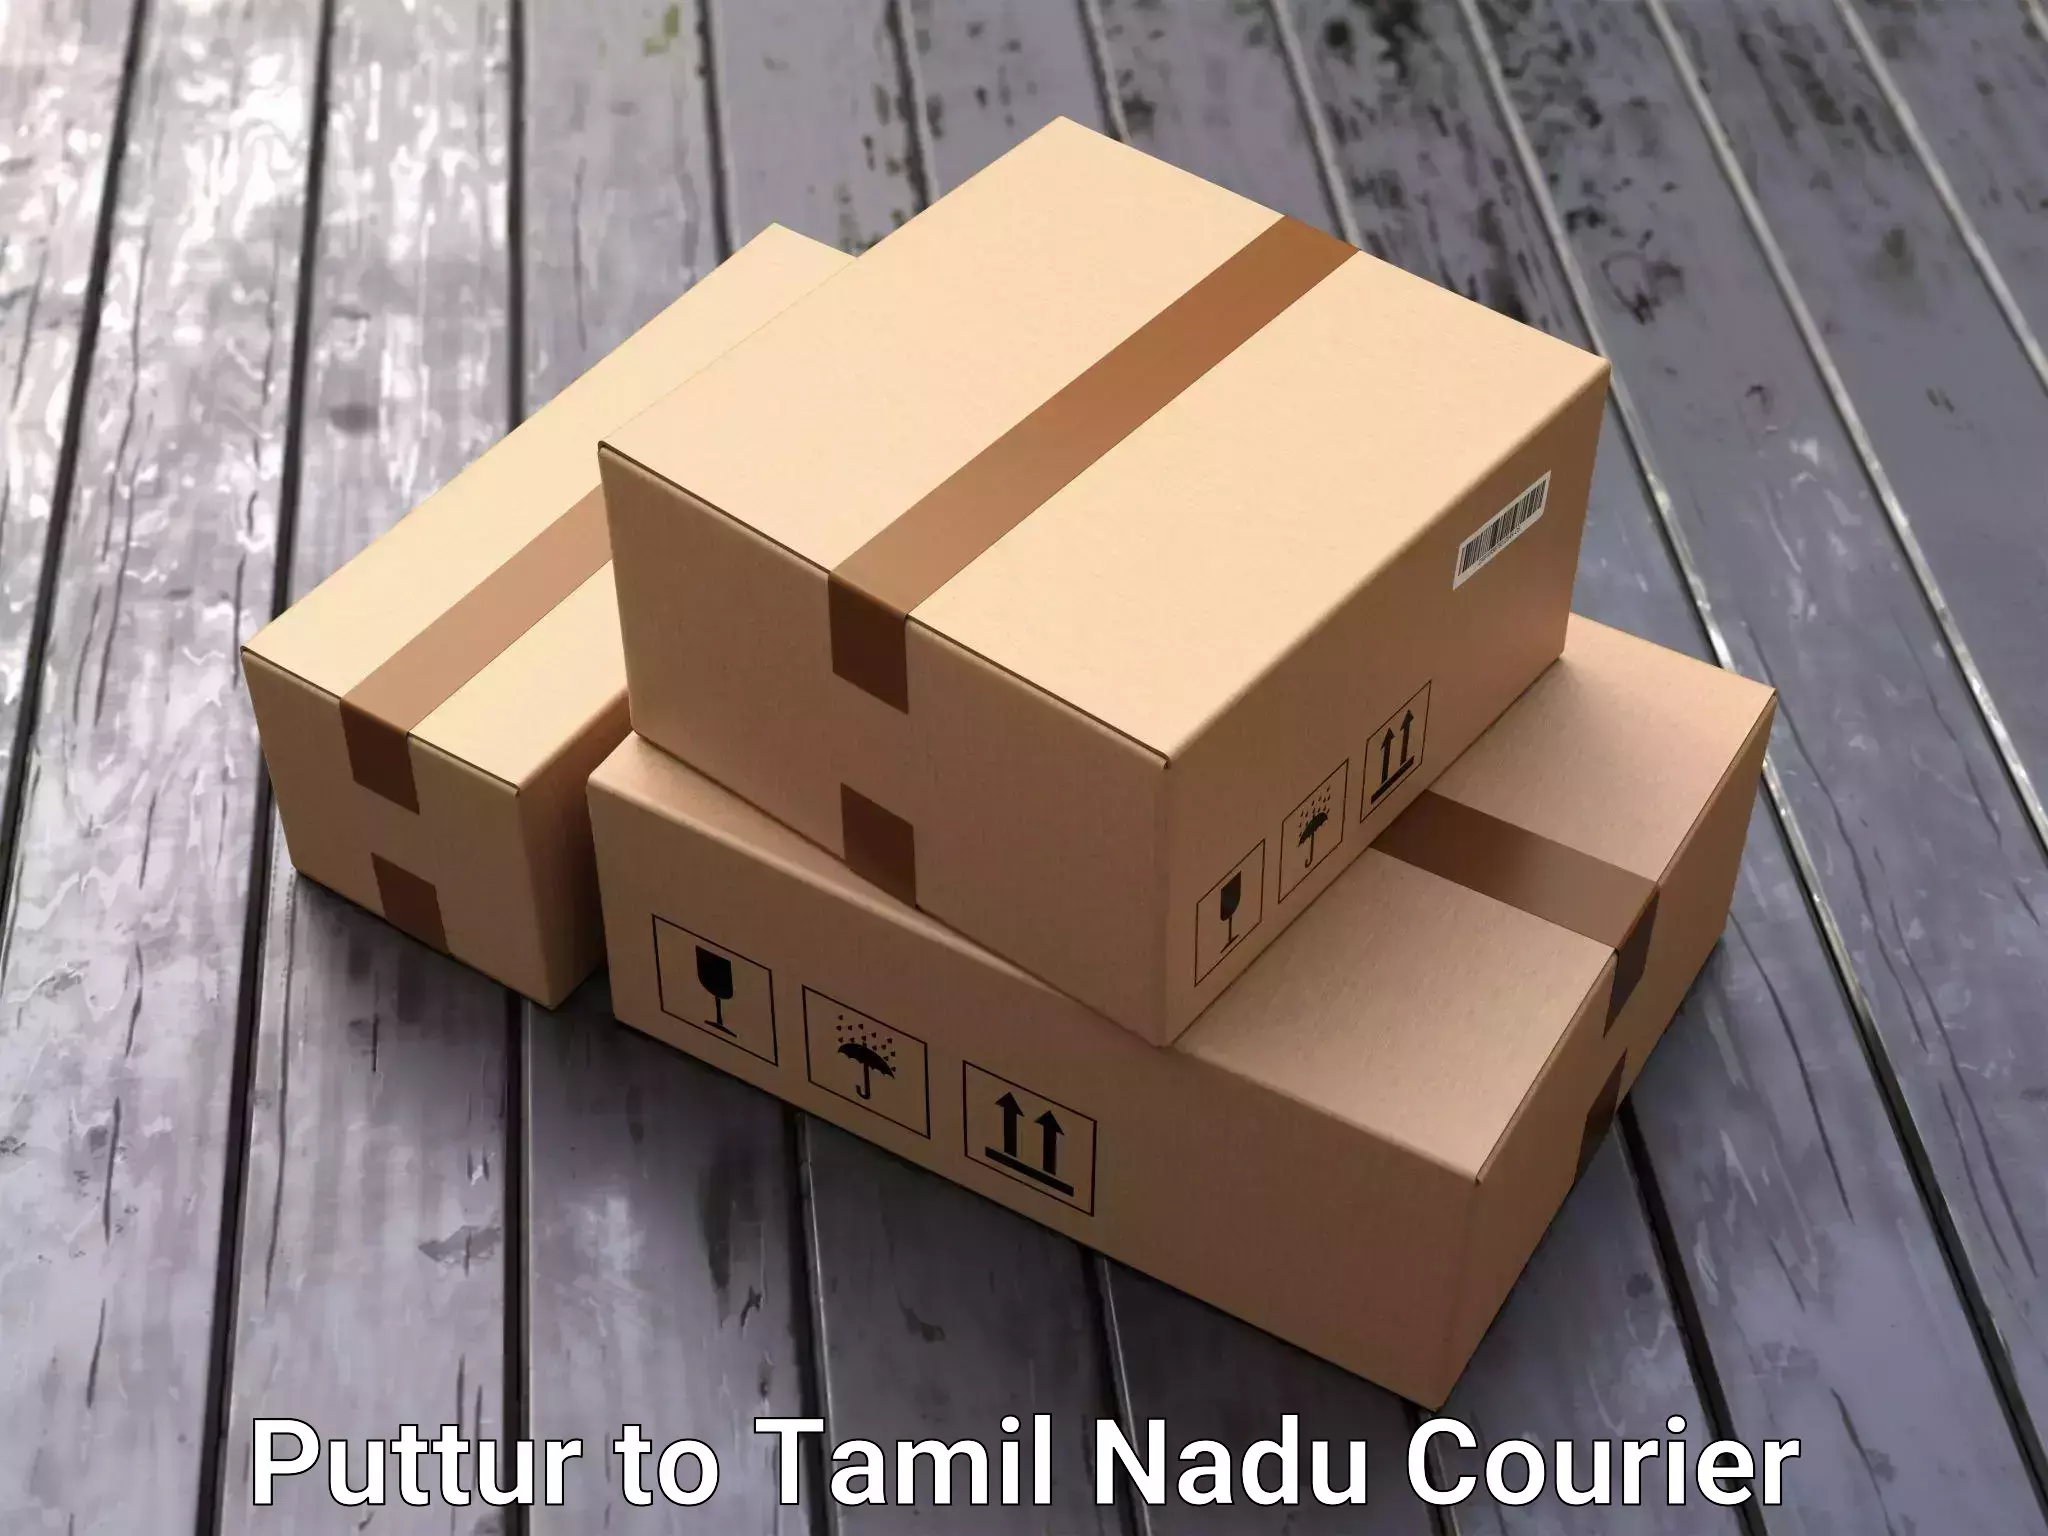 Full-service movers Puttur to Salem